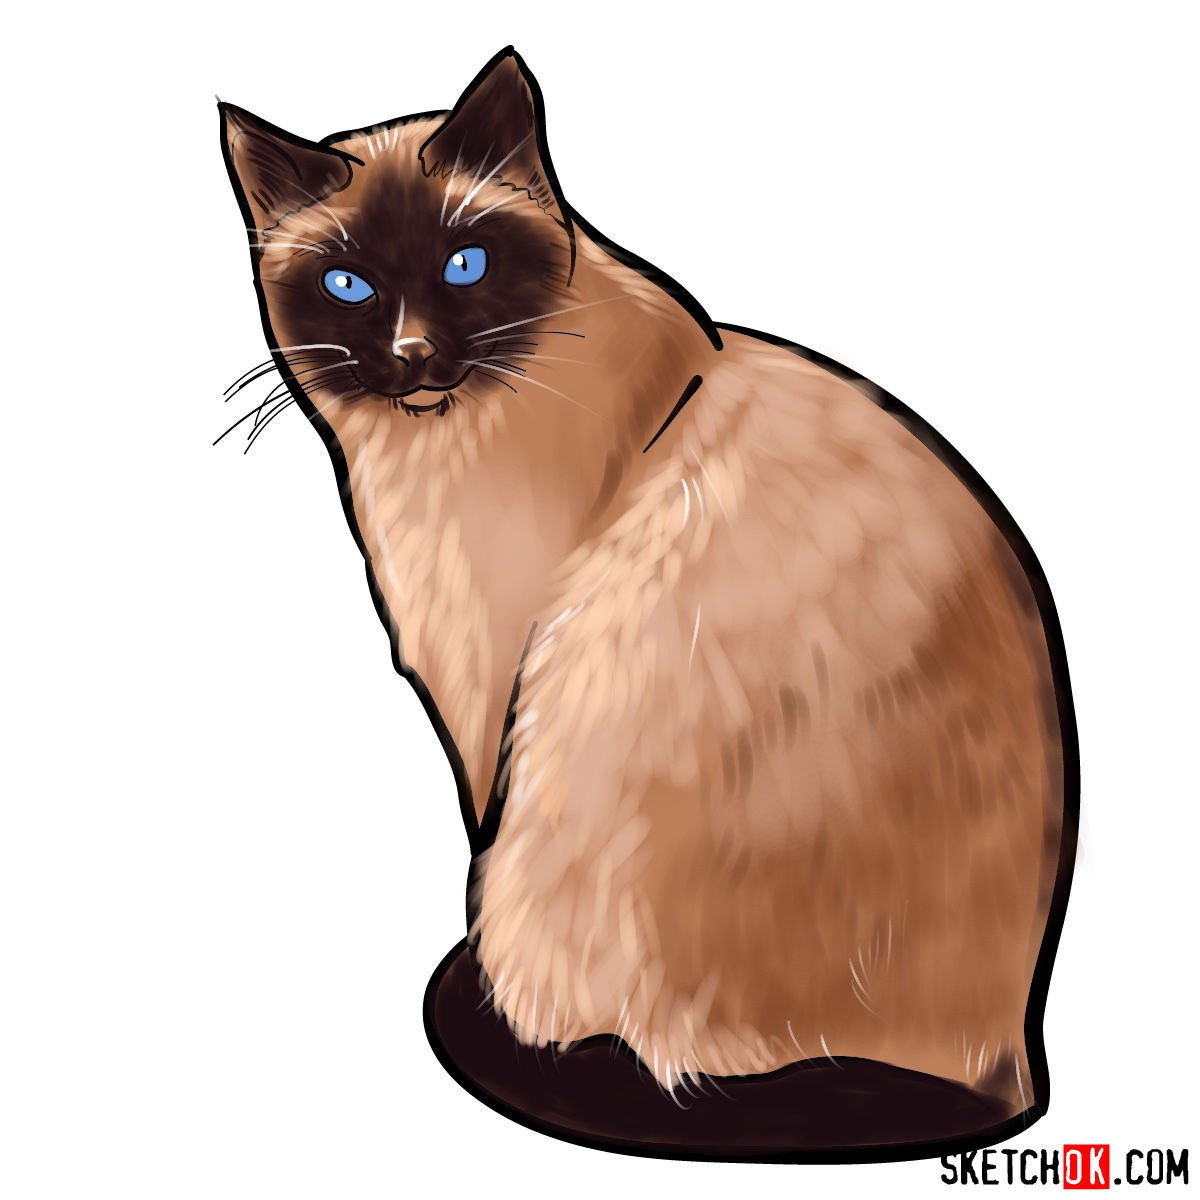 How to draw the Siamese cat